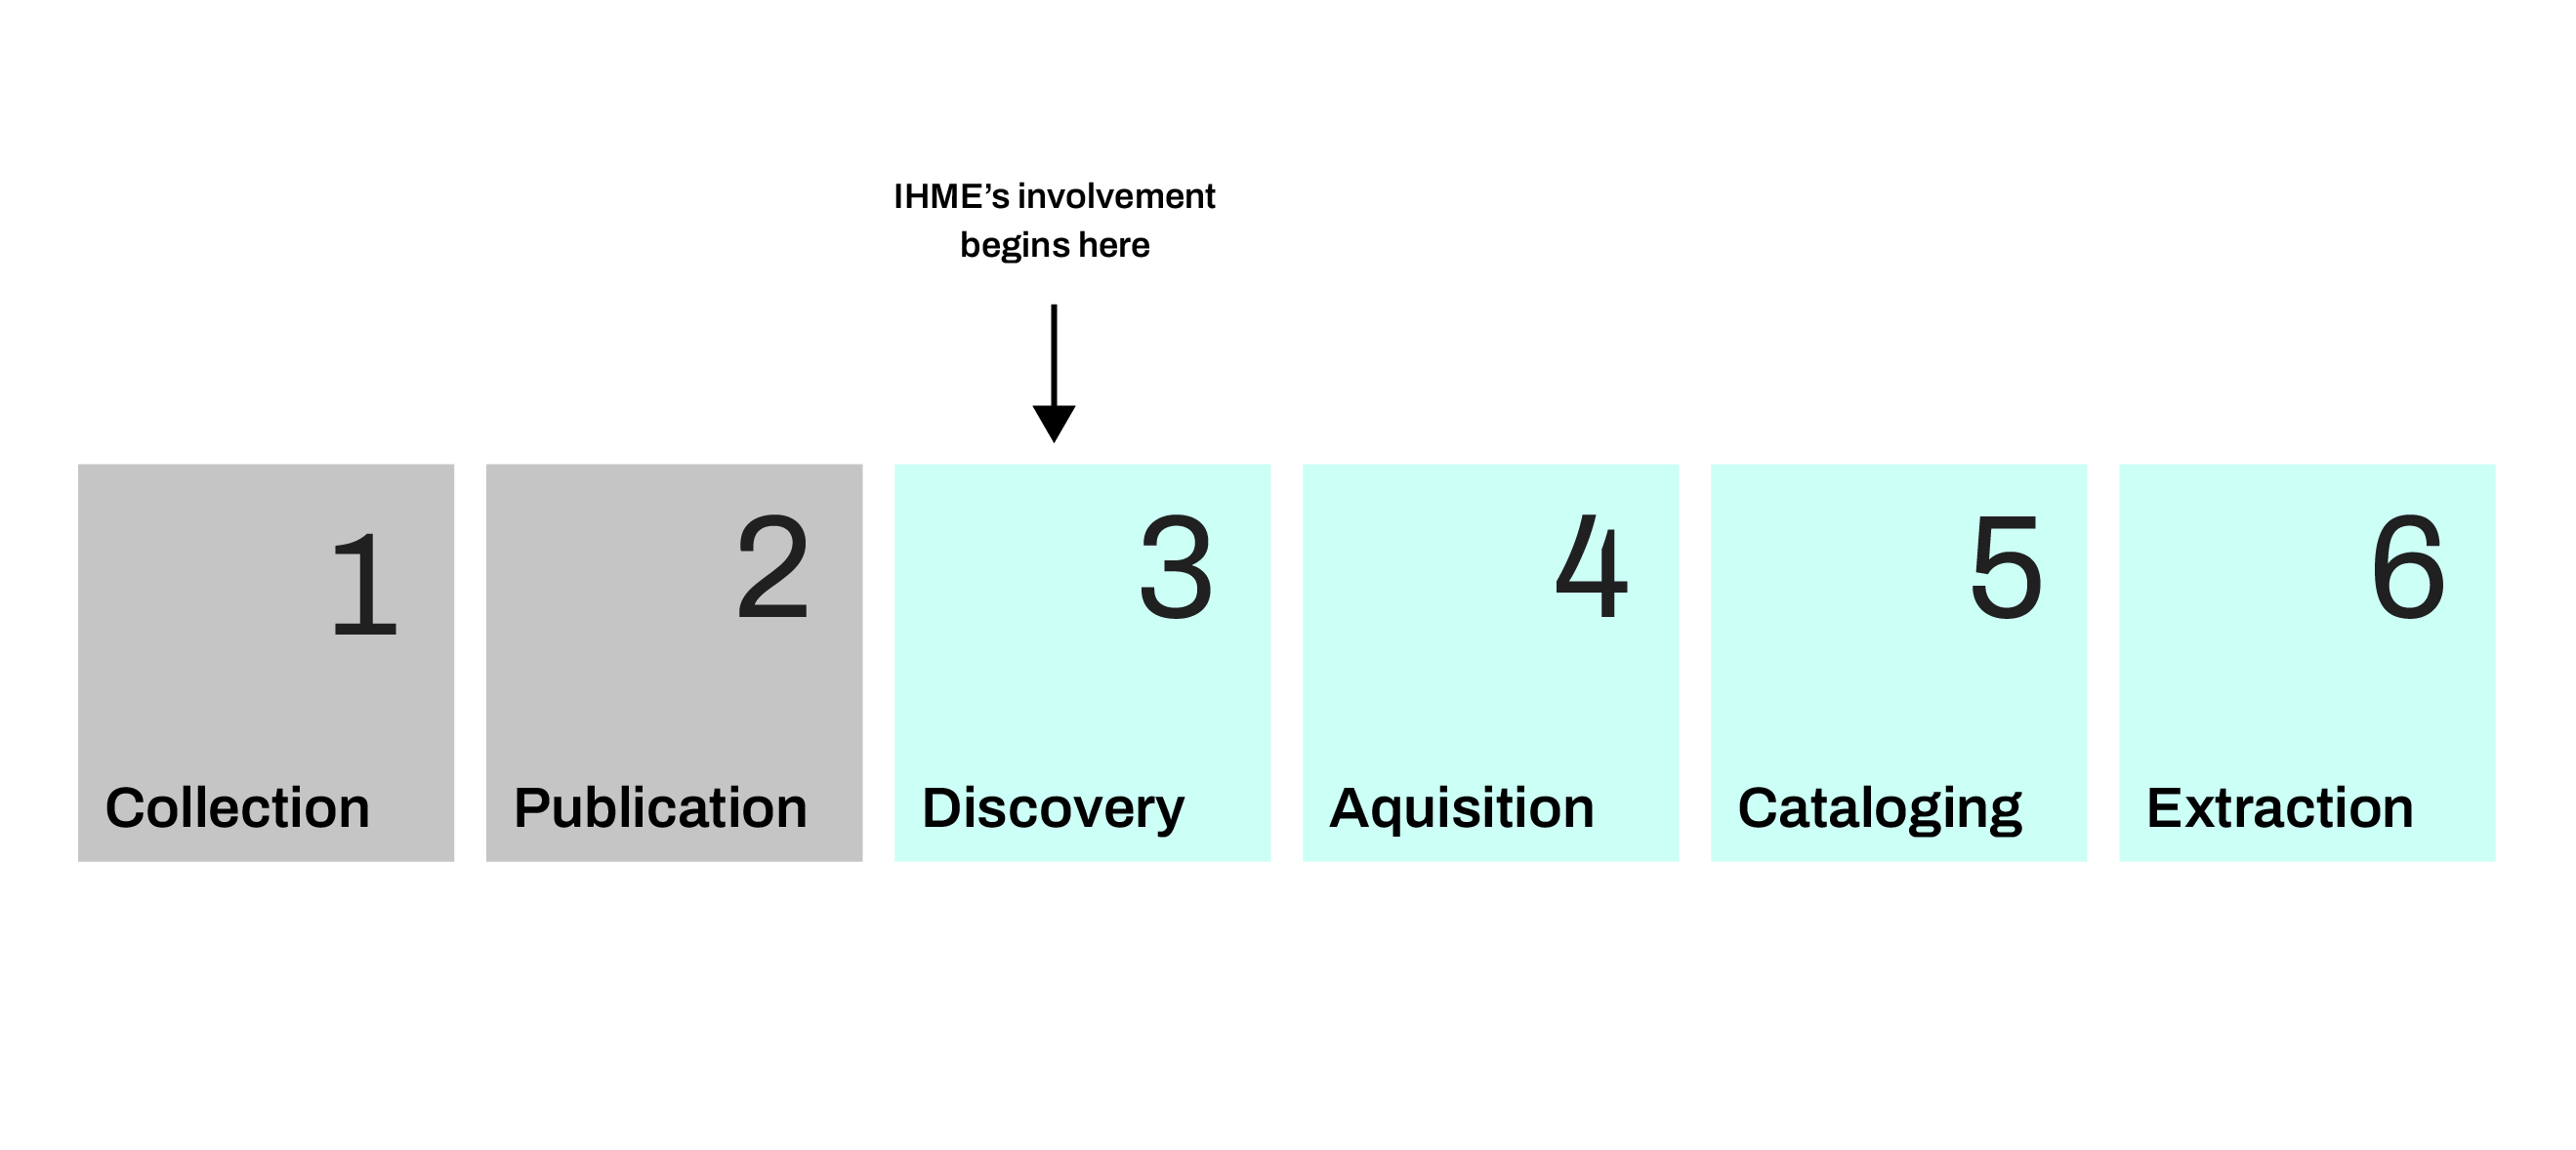 Step 1: Collection, Step 2: Publication (IHME's involvement begins here), Step 3: Discovery, Step 4: Acquisition, Step 5: Cataloging, Step 6: Extraction